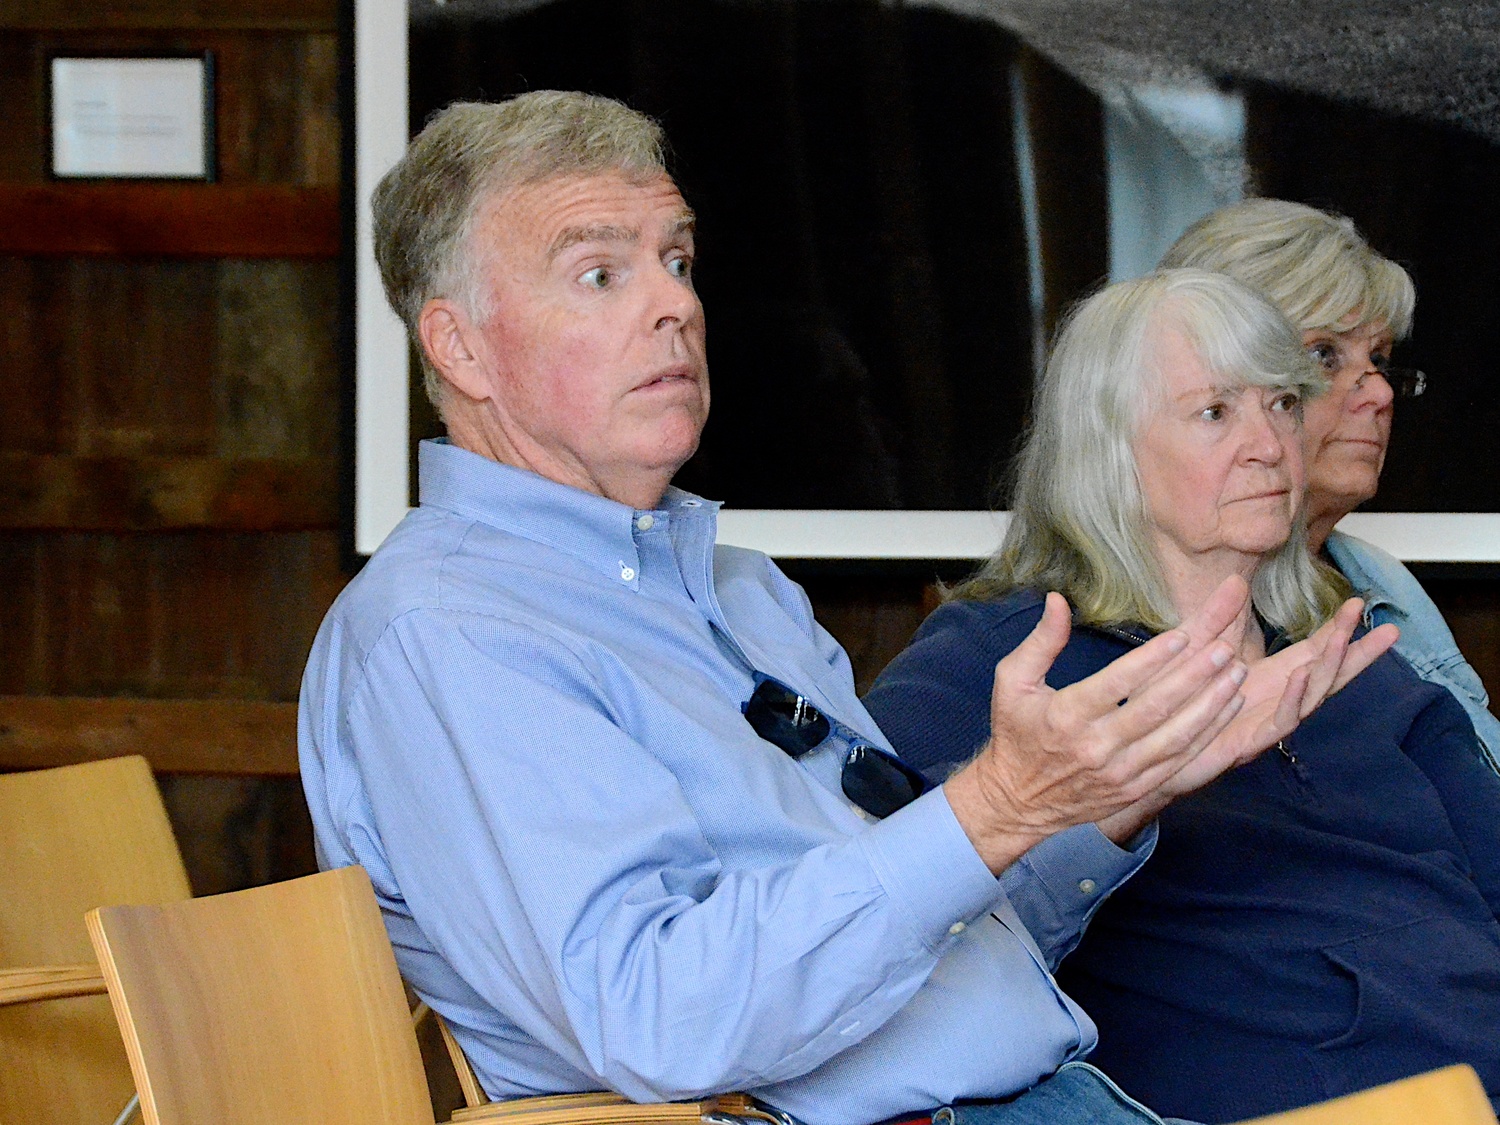 John Kirrane, a Noyac resident, has been a vocal critical of East Hampton Town's handling of aircraft traffic that overflies Southampton Town neighborhoods and butted heads with East Hampton Town Board members on Tuesday. 
KYRIL BROMLEY